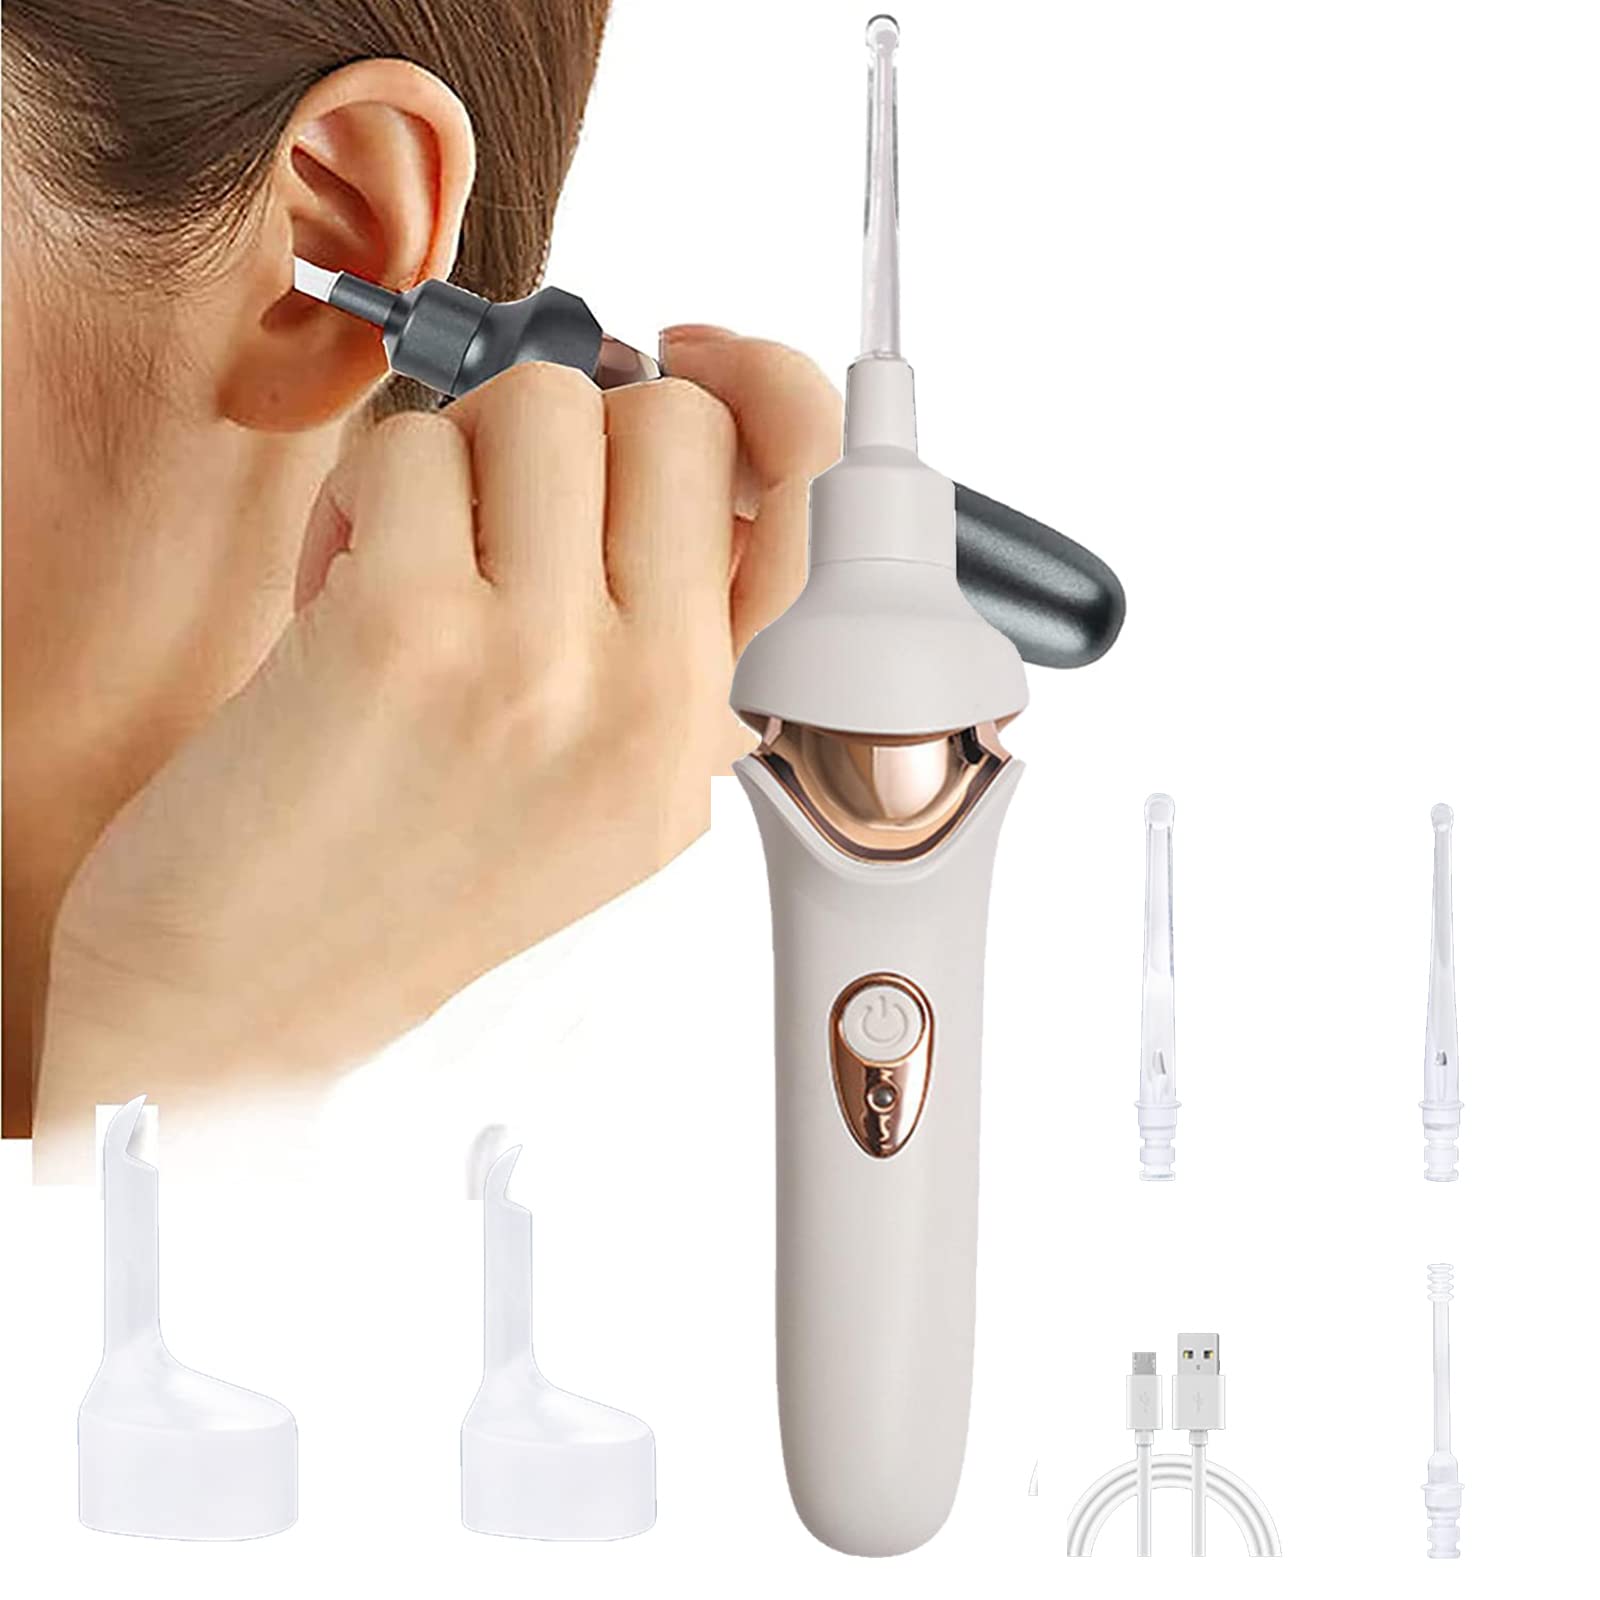 Earwax Remover Kit, Ear Cleaner Ear Vacuum Wax Remover, Painless Soft  Suction Electric Ear Cleaner with LED Light, Safe and Comfortable Silicone  Ear wax Remover Tool with Double Size Head 